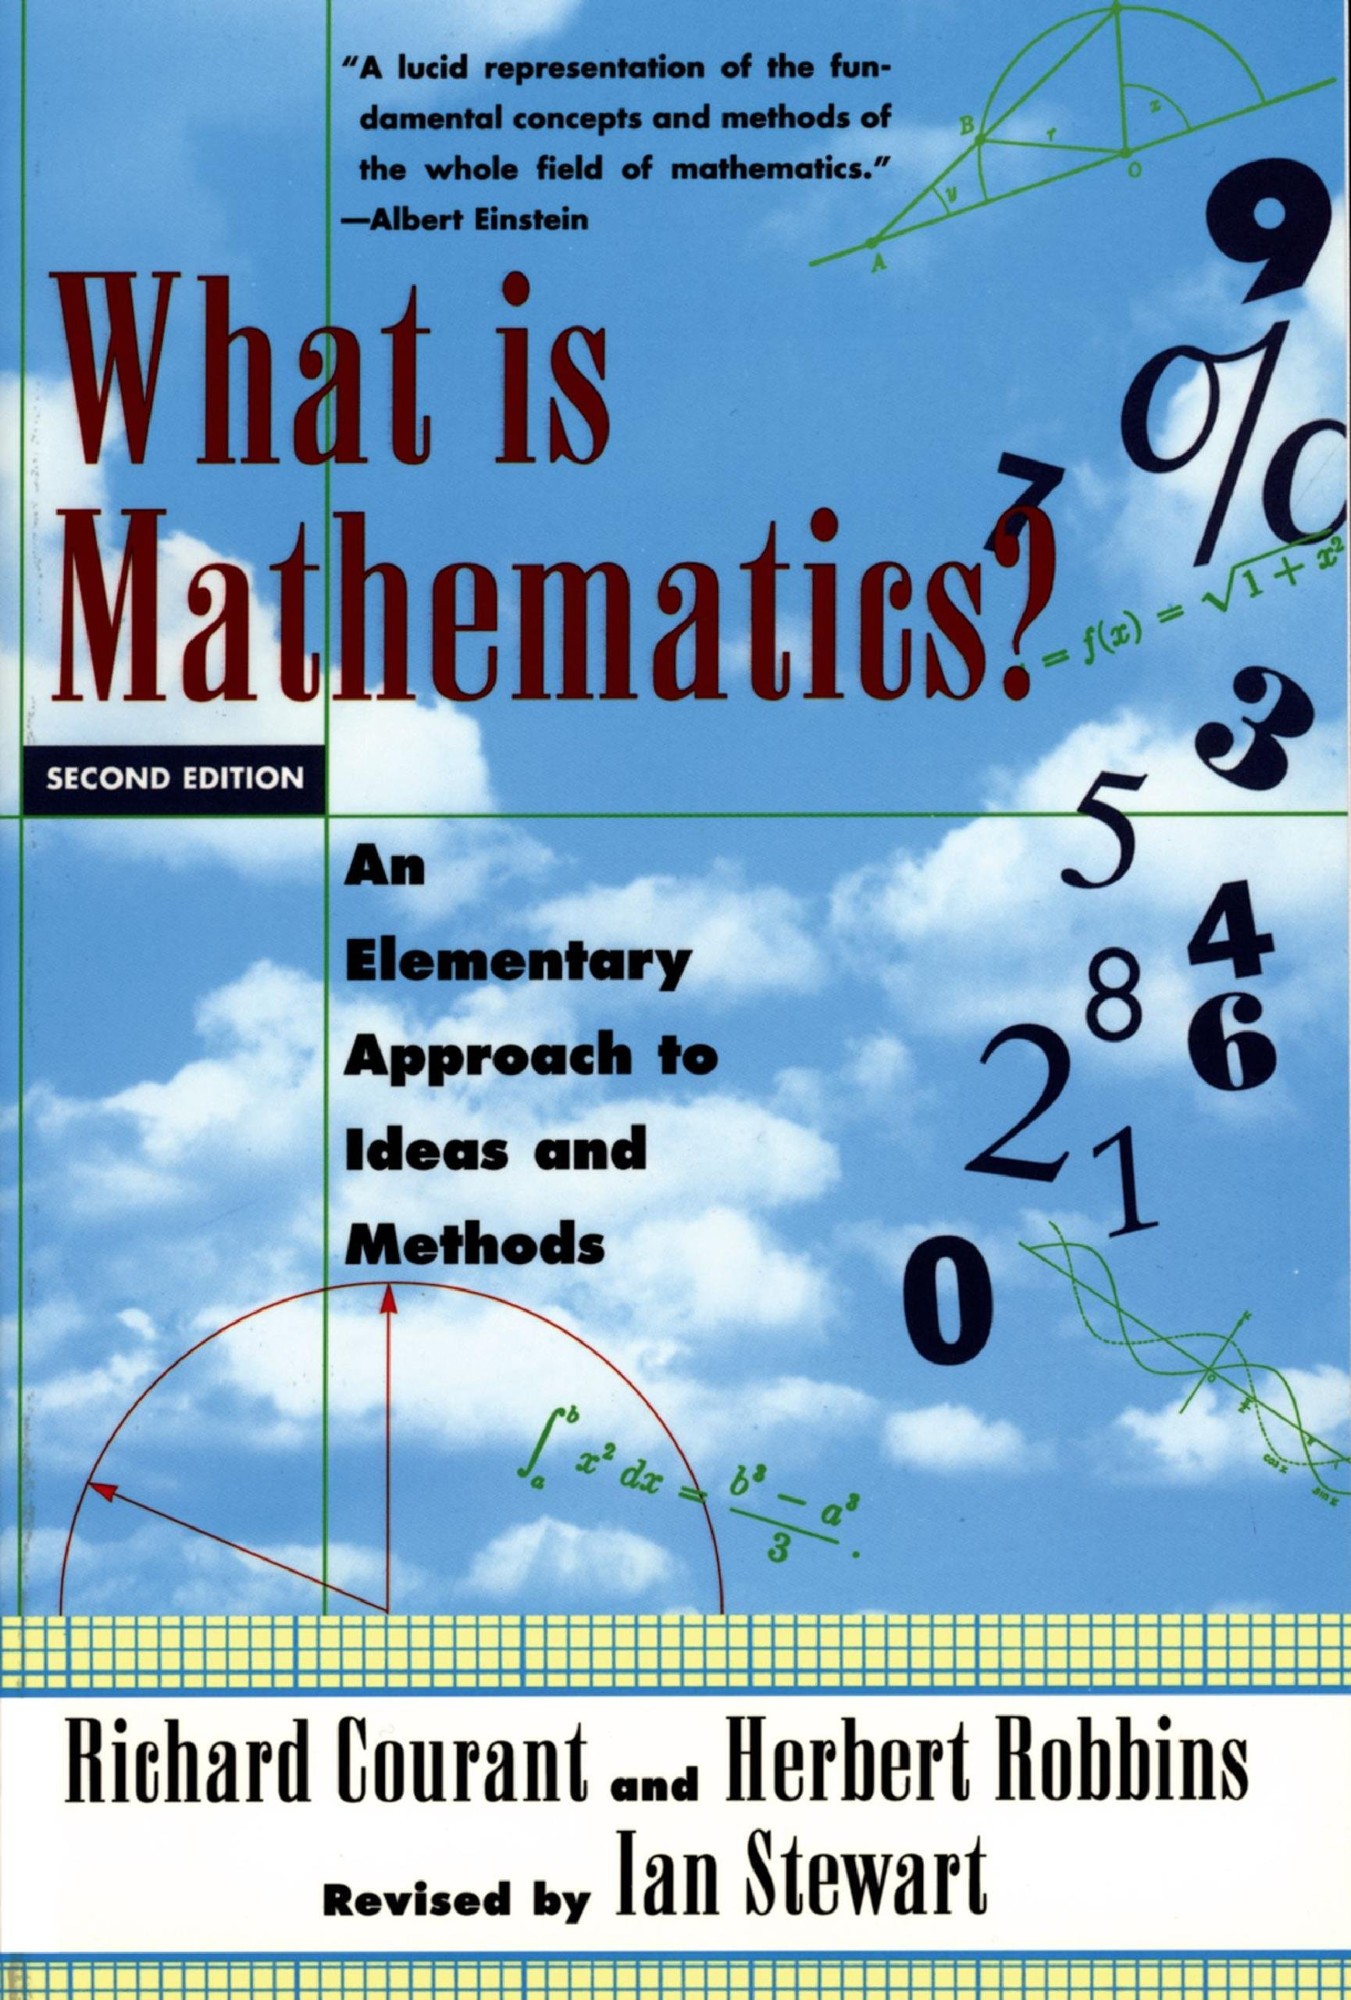 What Is Mathematics?: An Elementary Approach to Ideas and Methods, Second Edition